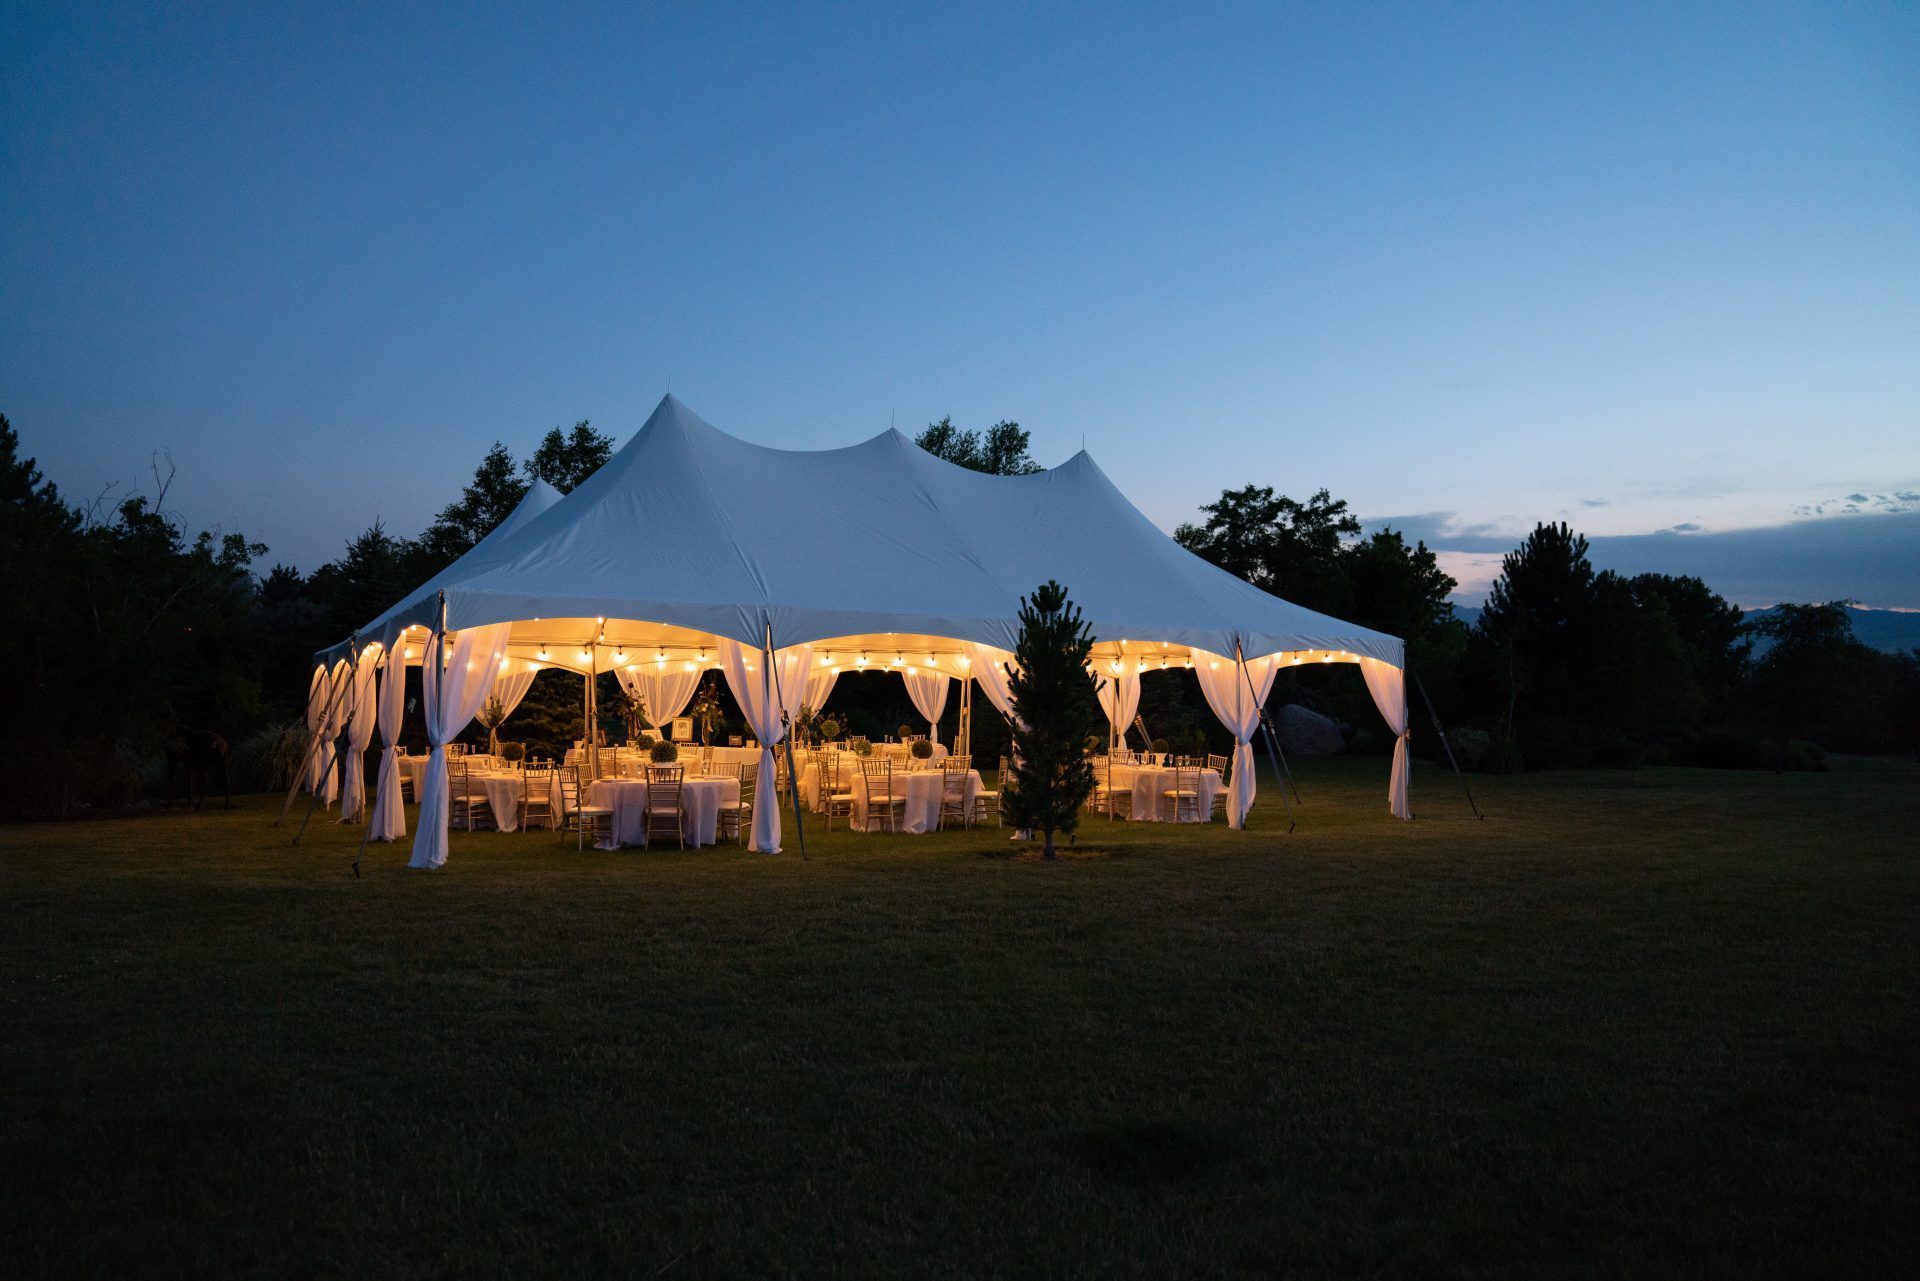 Memorial Mortuaries Celebration of life tent set up with tables, chairs and flowers at night with lights on